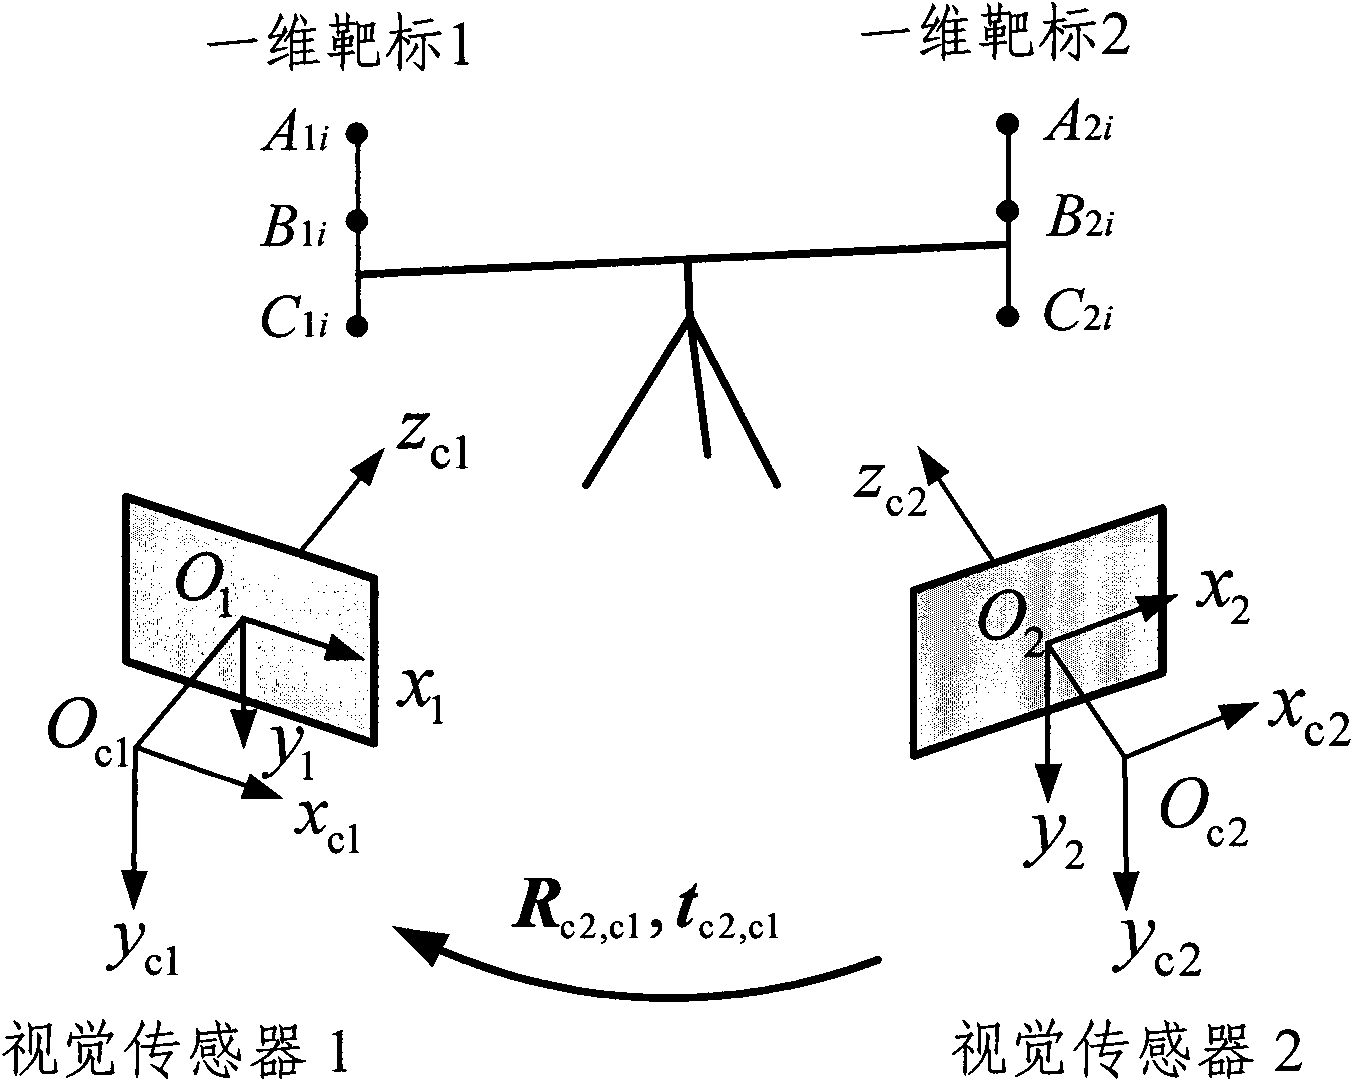 Global calibration method and device of rigid rod of multisensor vision measurement system